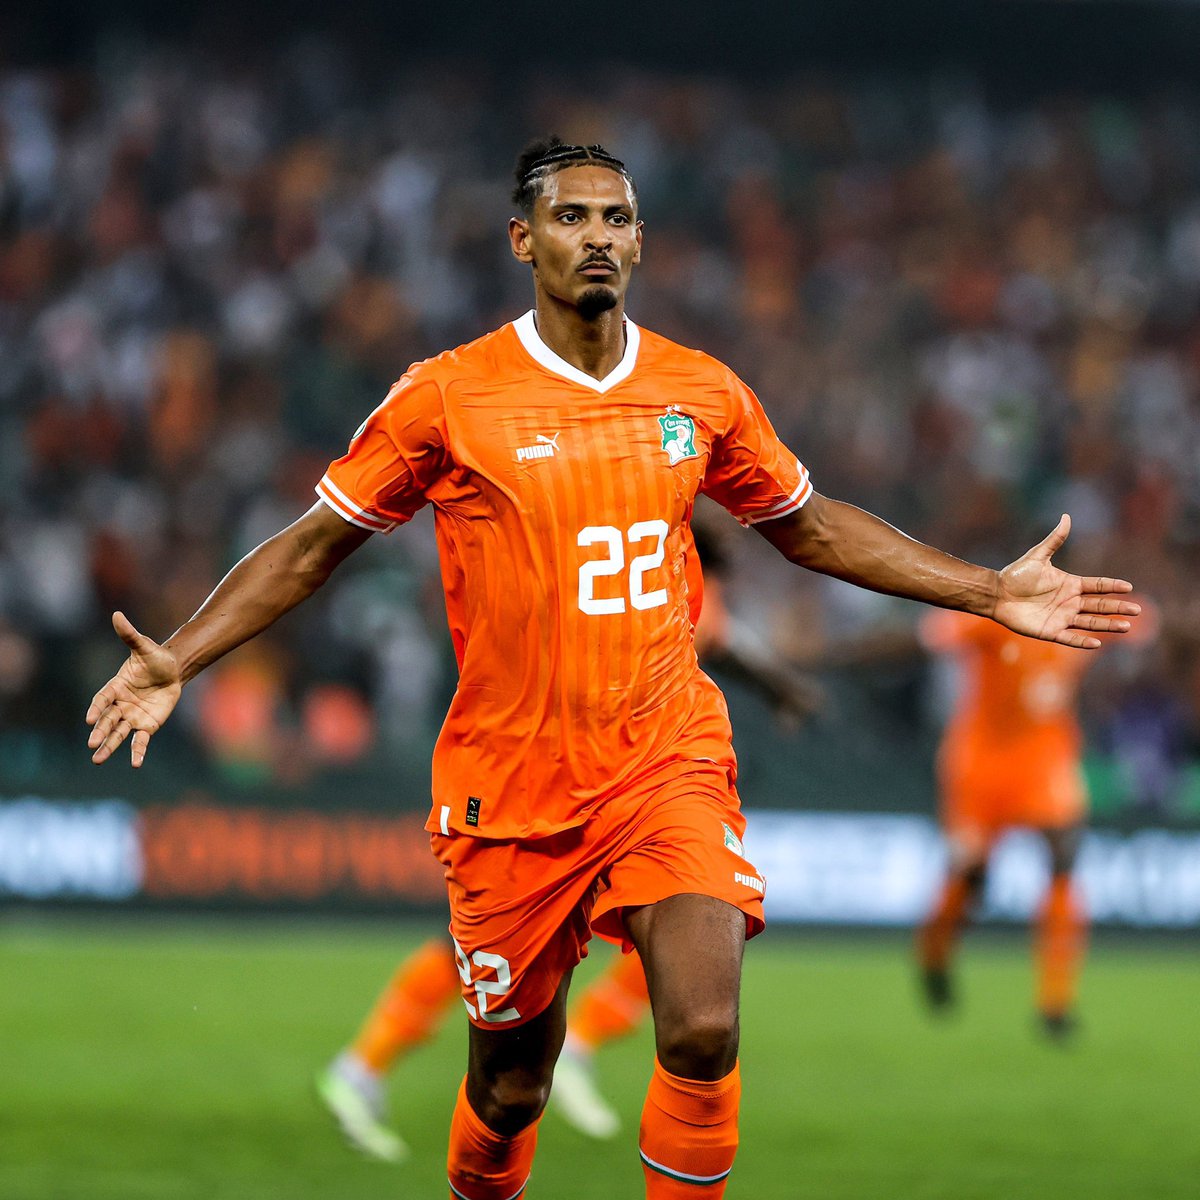 Sebastien Haller is a beating addict blud beaten Cancer and now he’s beating Nigeria give him some Respect 🇨🇮

#AFCON #AFCONFinal #TotalEnergiesAFCON #AFCON2023 #AFCON2024